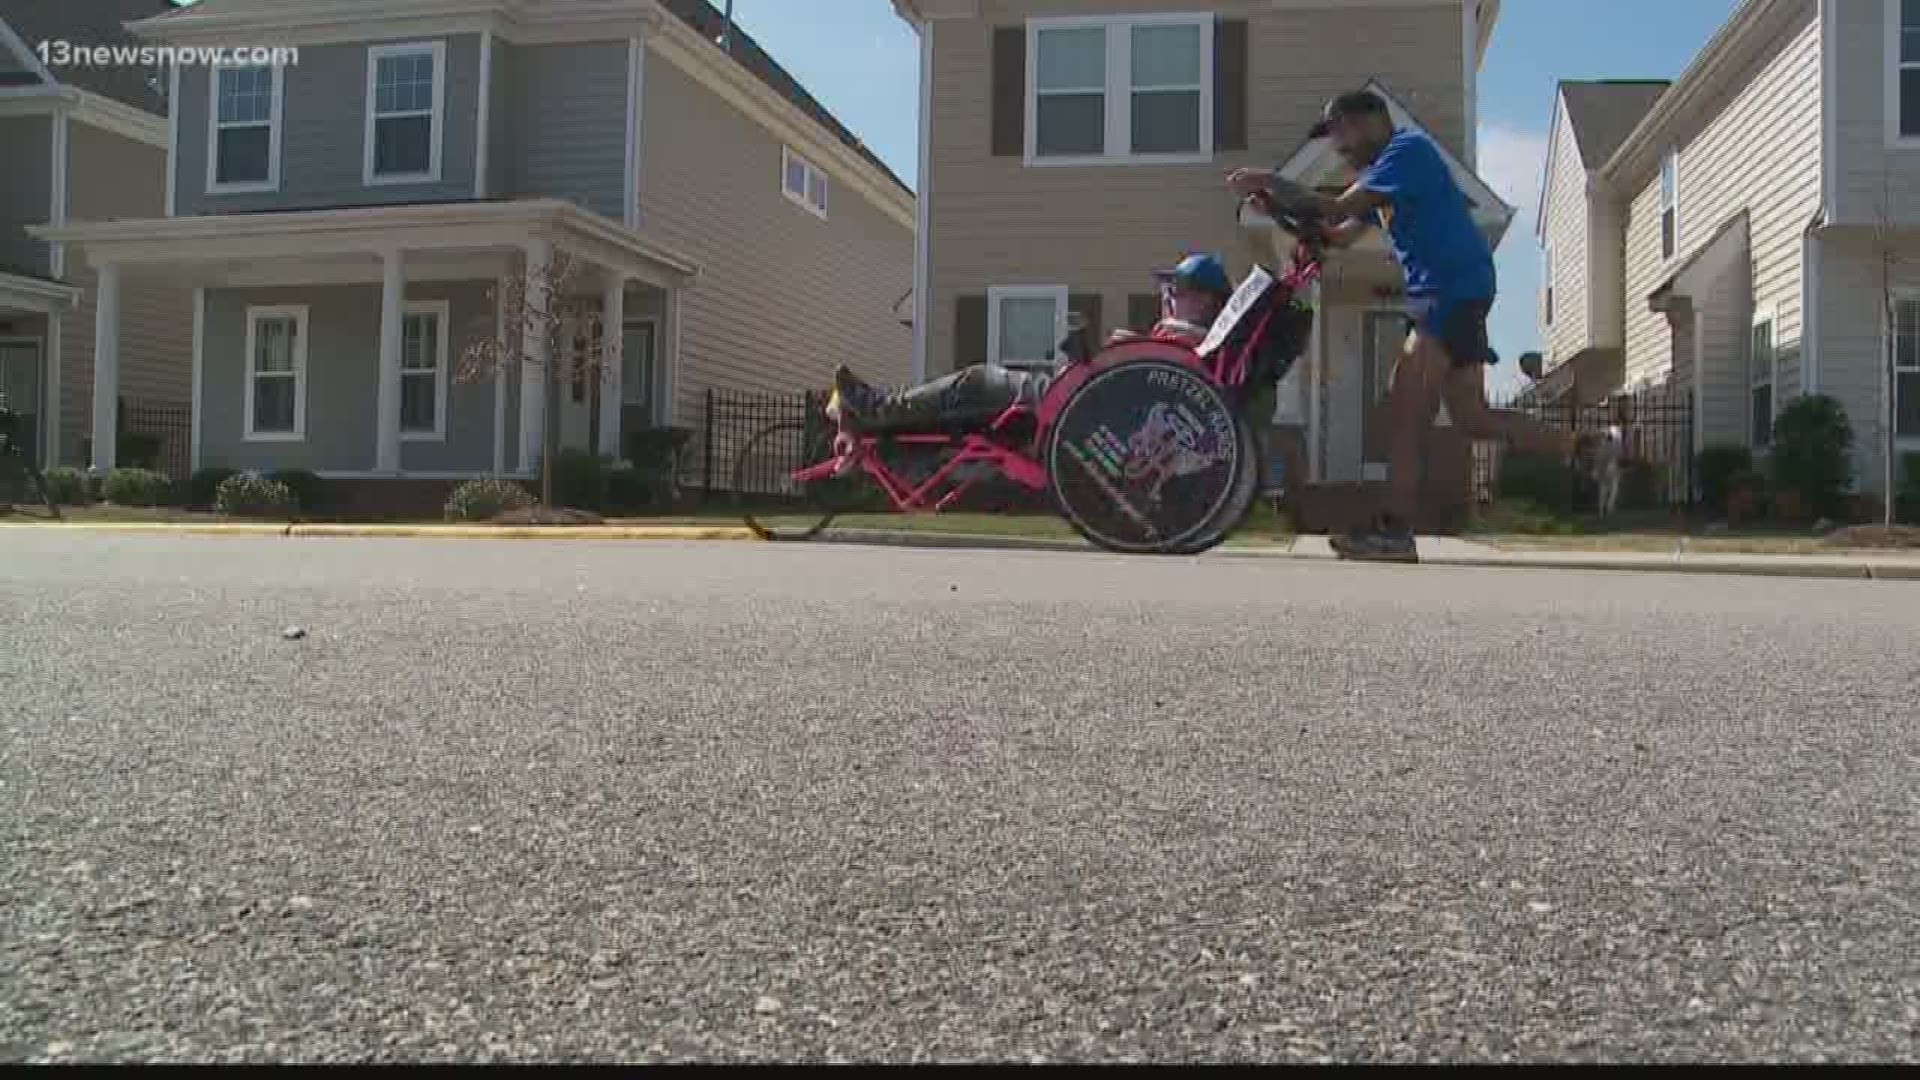 In just a few days two local friends are teaming up to run the Boston Marathon.